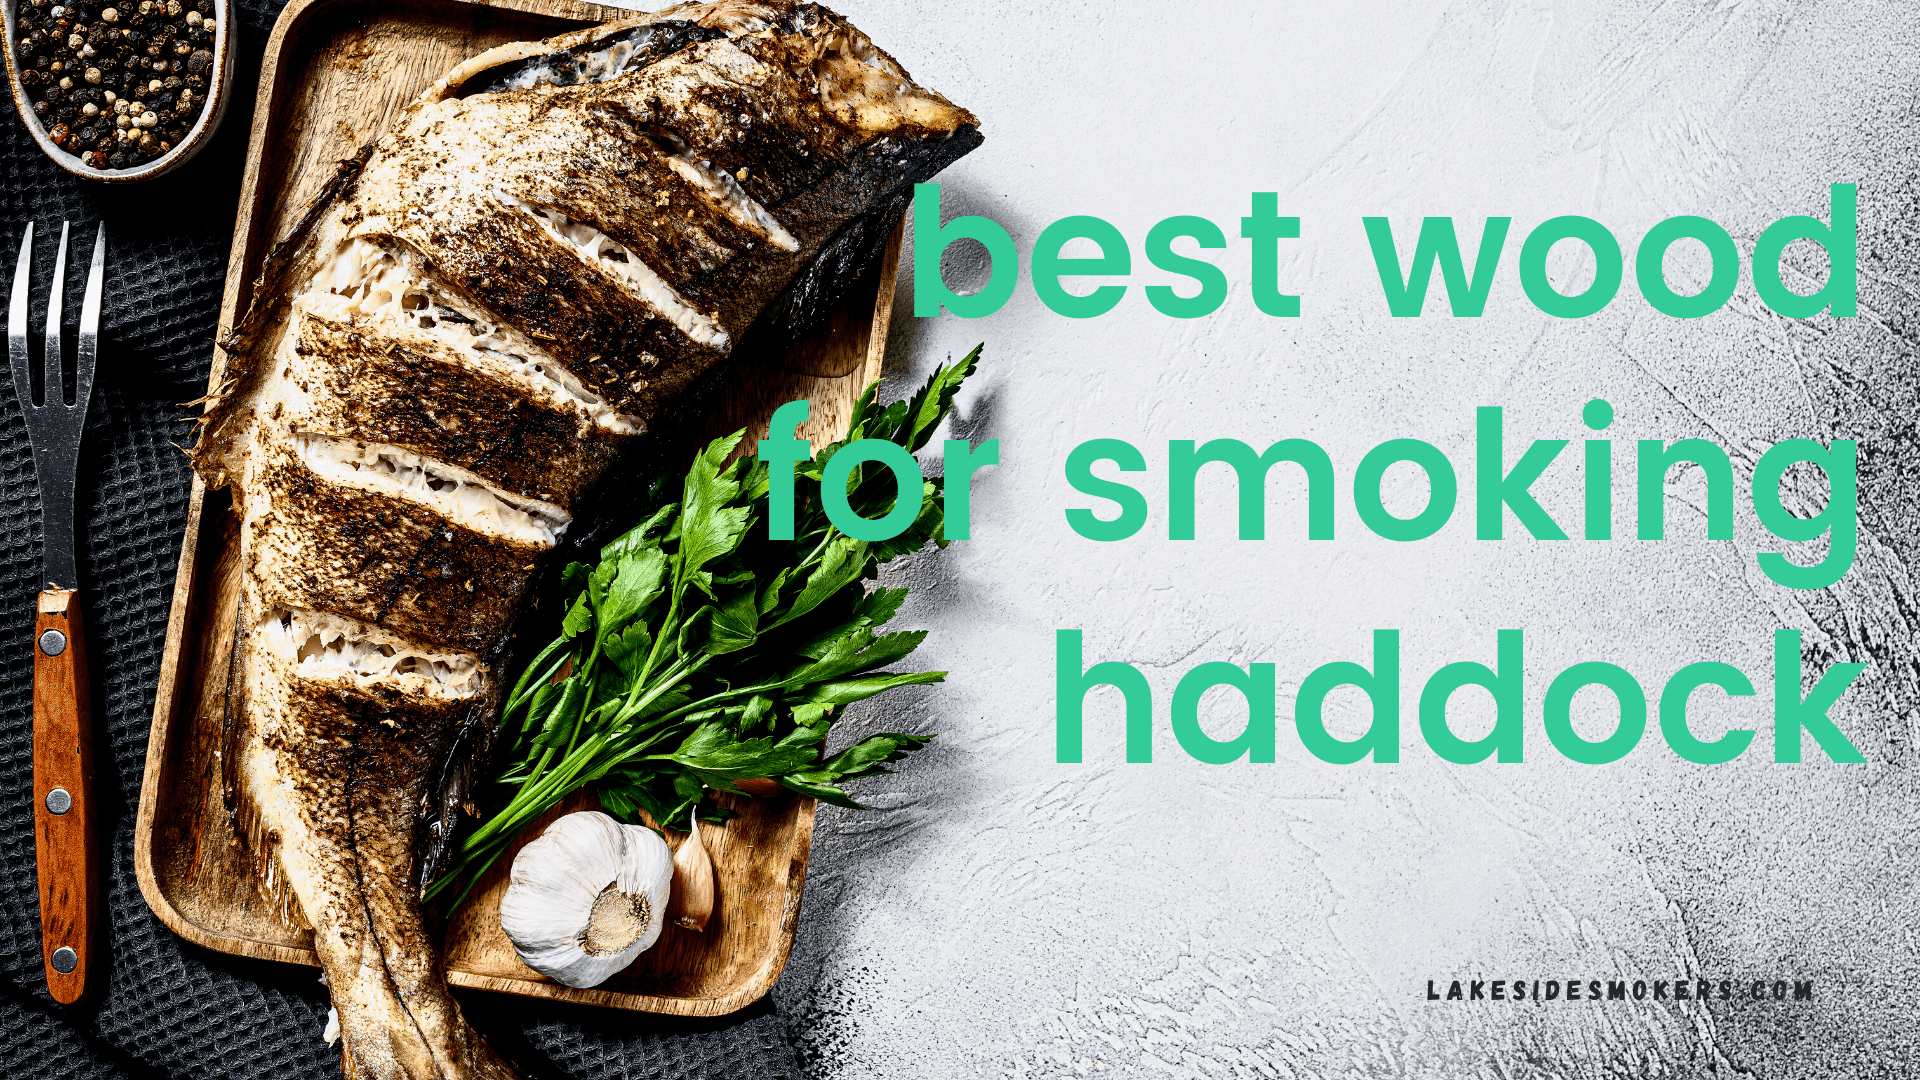 Best wood for smoking haddock | Infuse this white fish with flavor